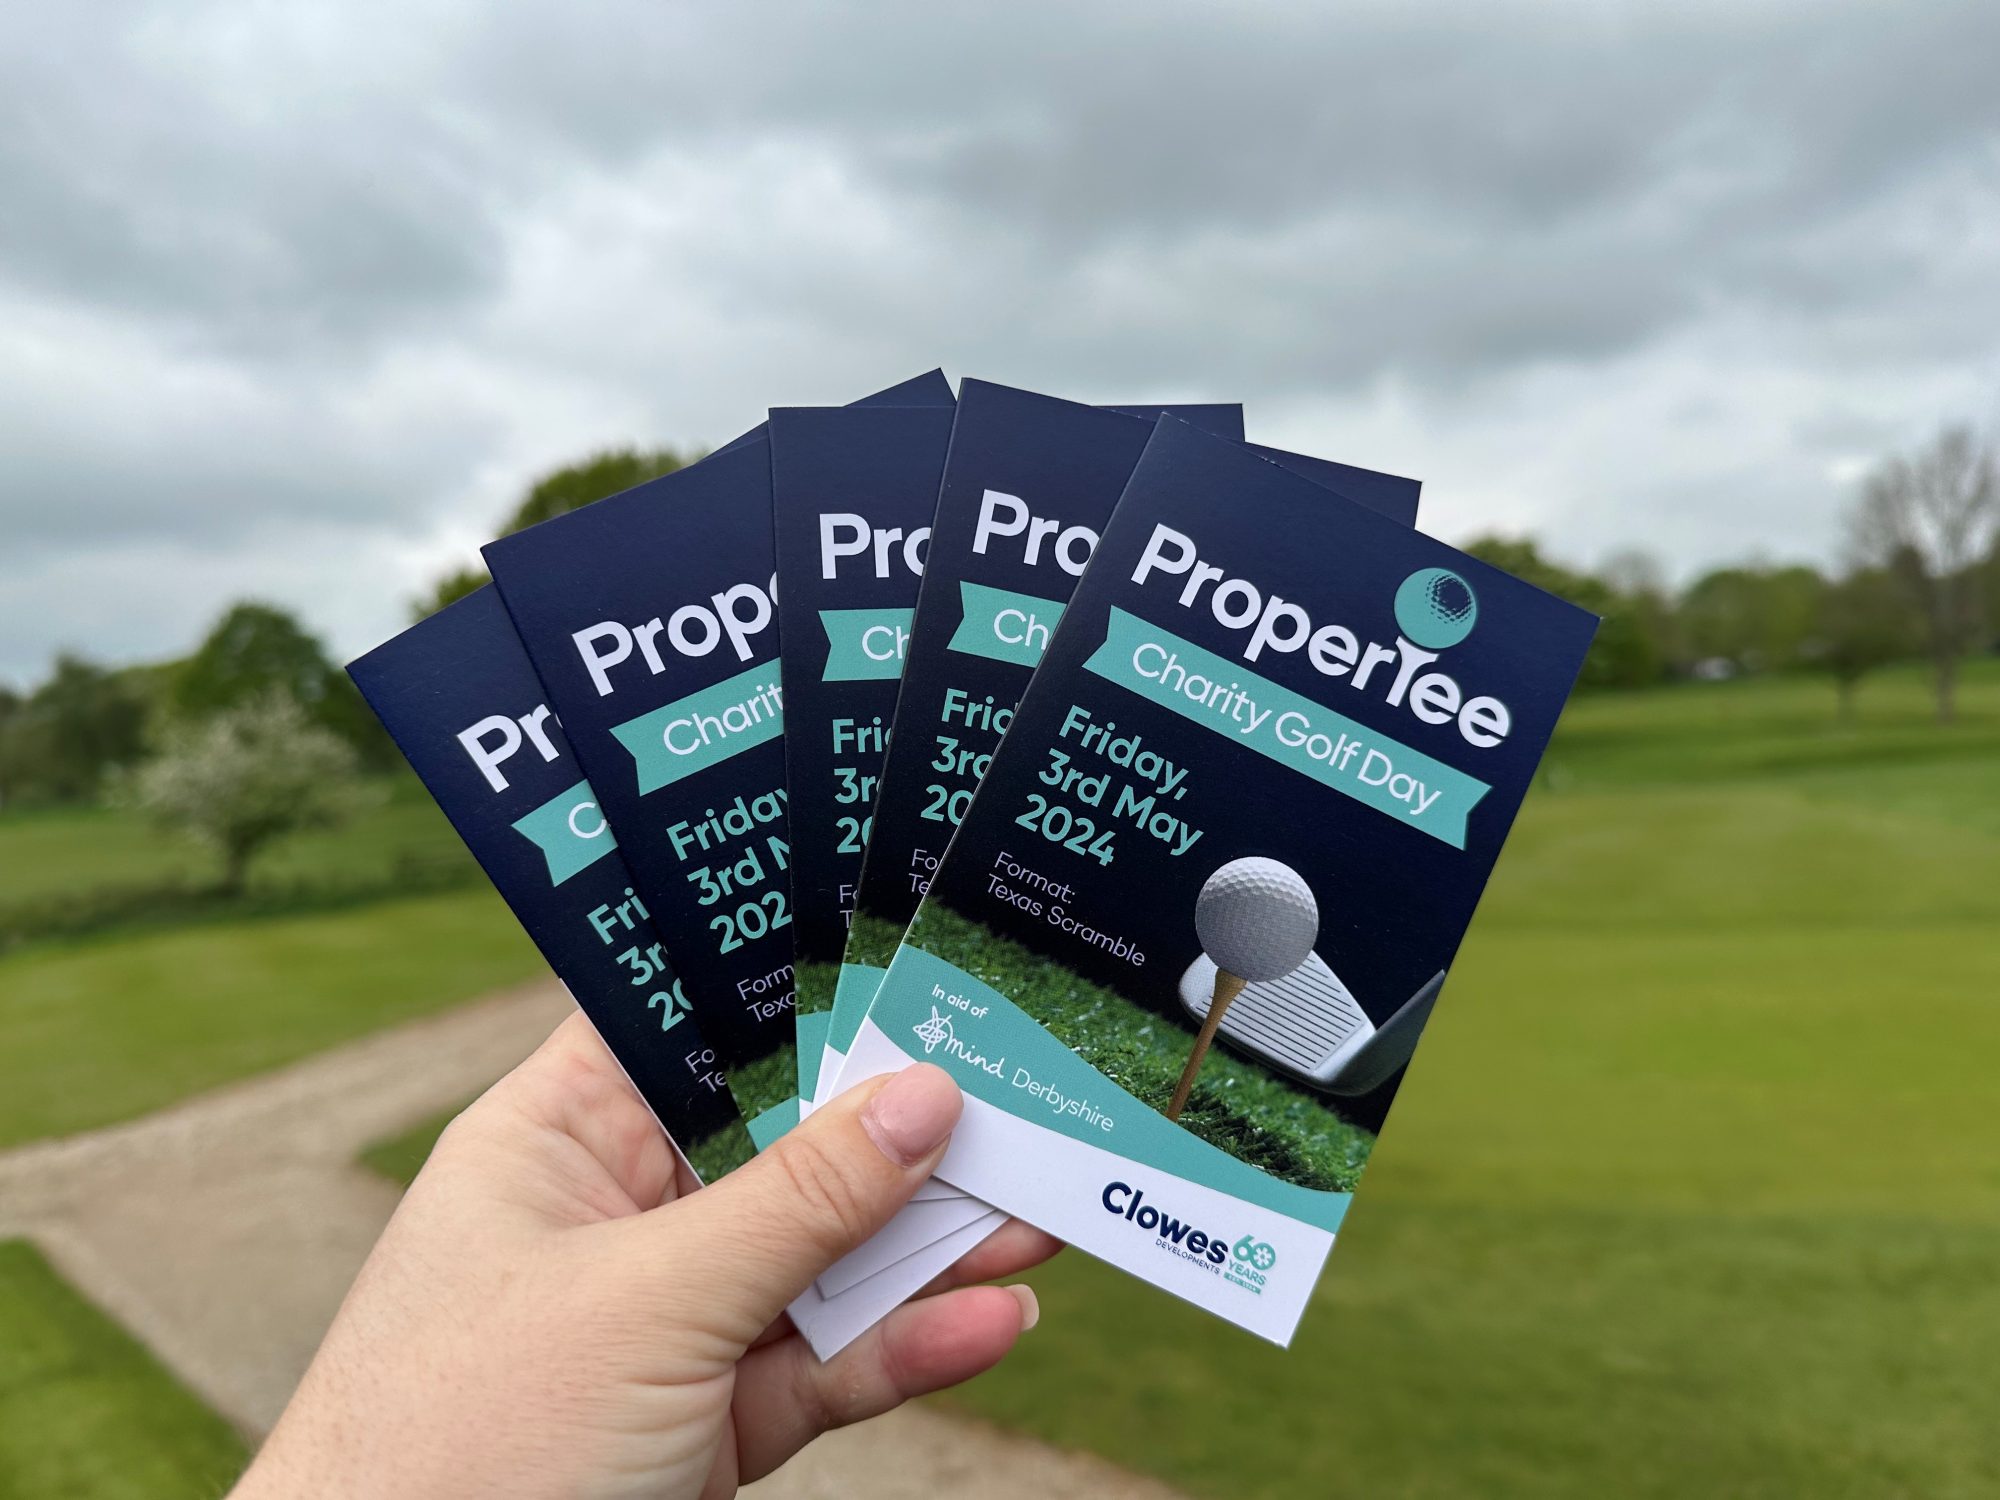 Clowes Developments ProperTee golf day Golf score cards fanned with course in background